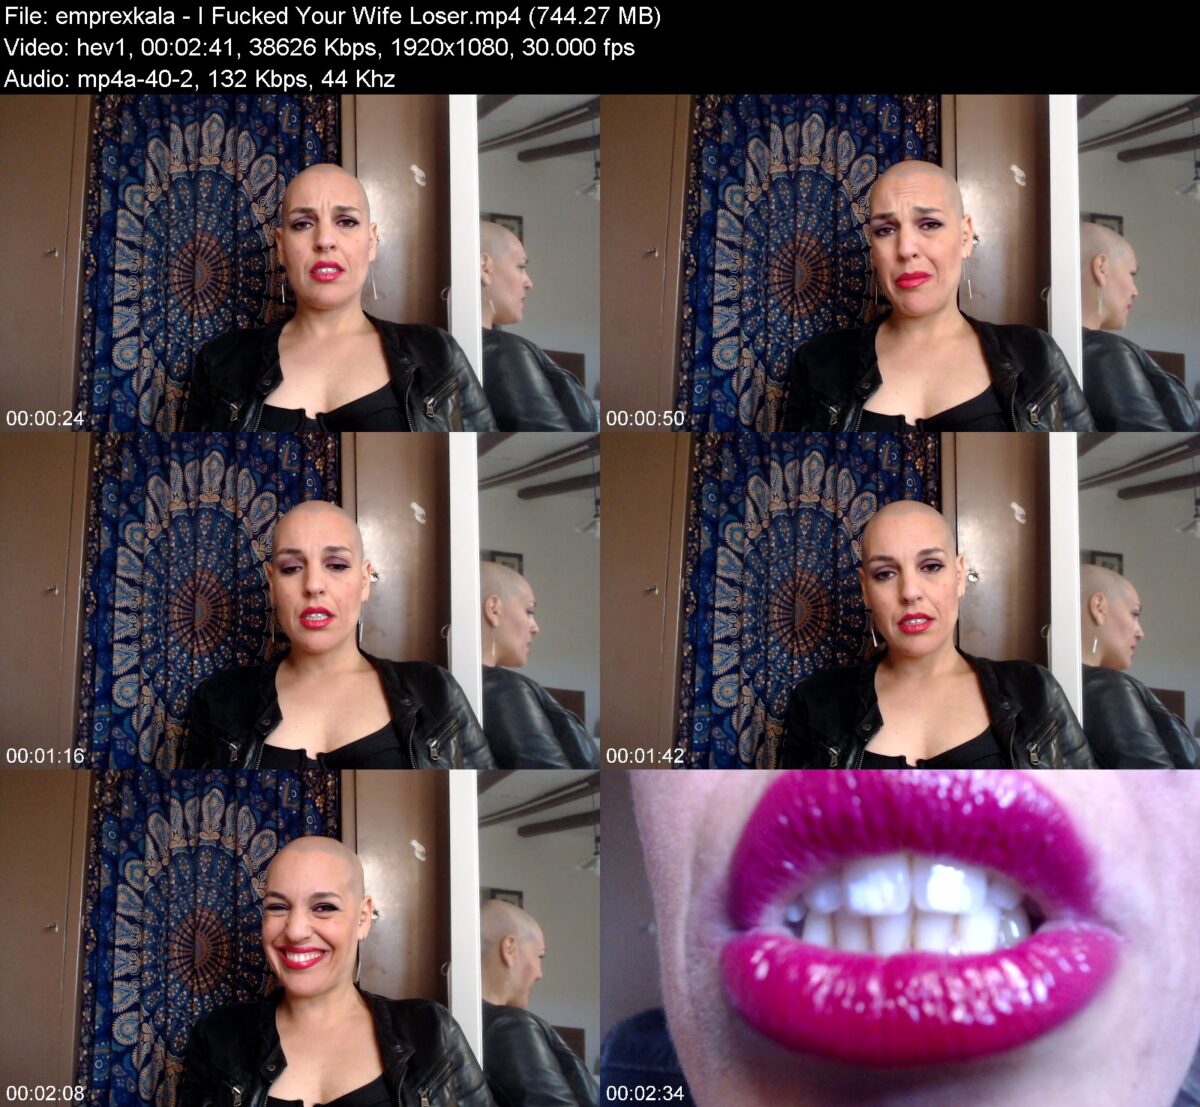 Actress: emprexkala. Title and Studio: I Fucked Your Wife Loser